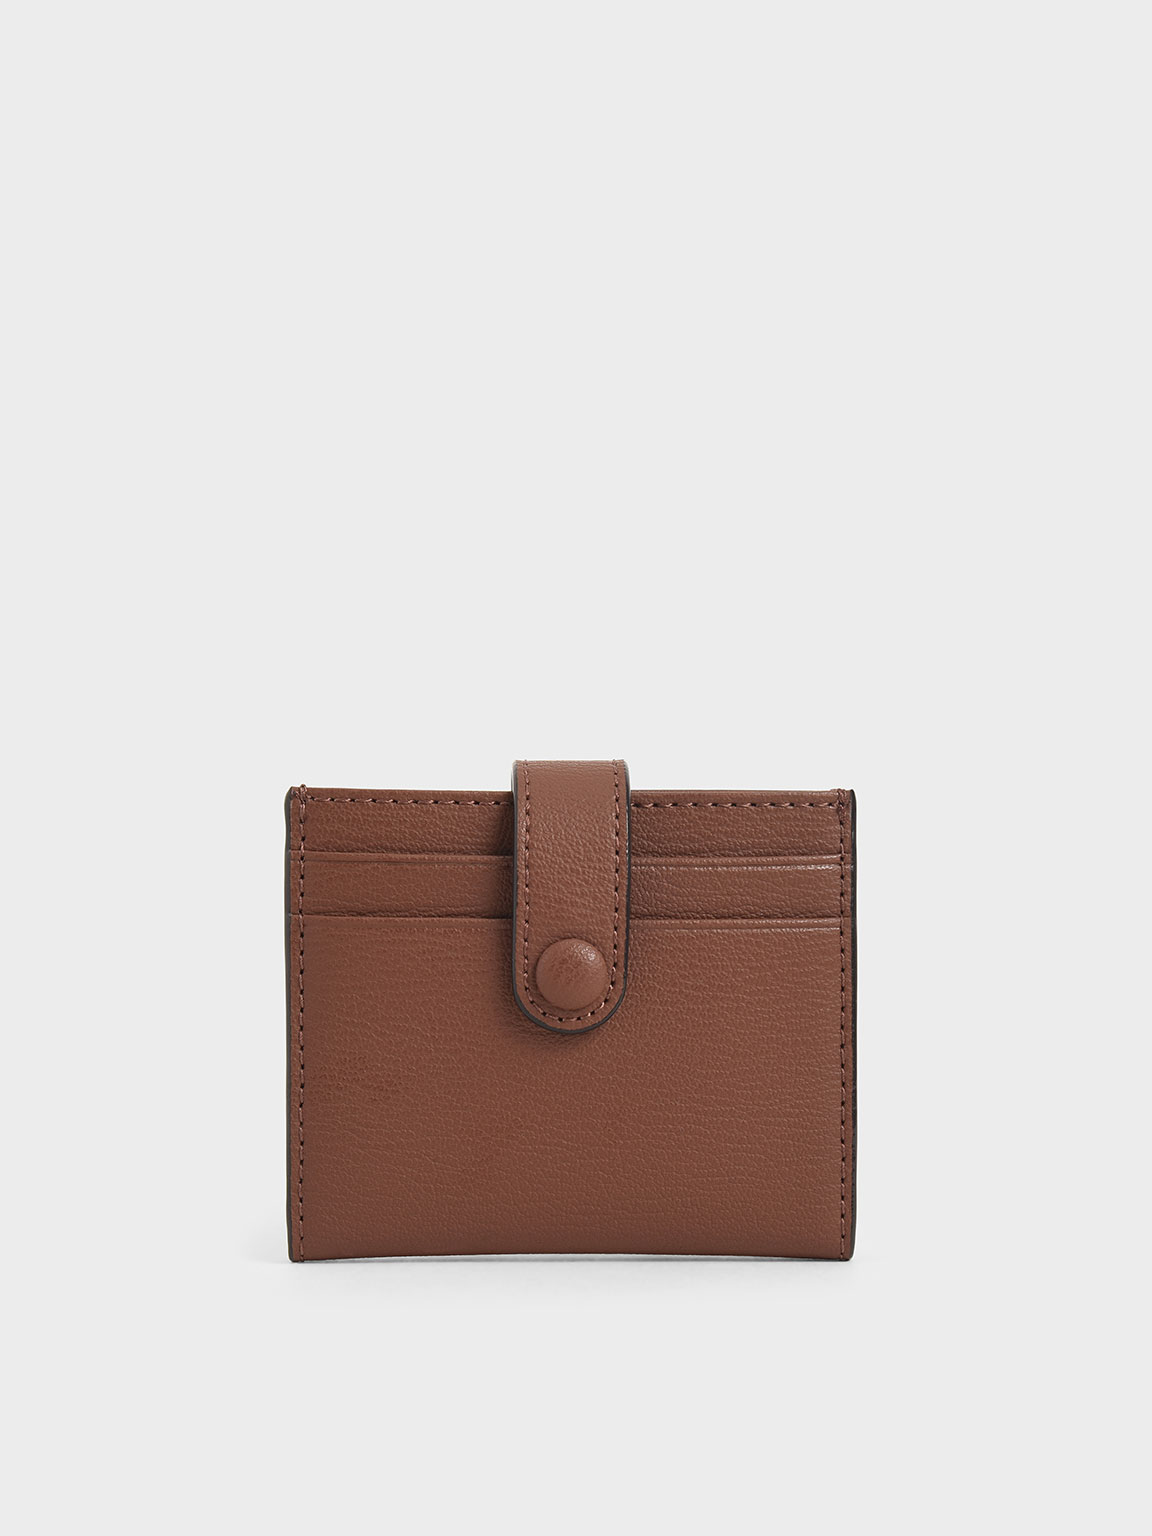 Chocolate Snap Button Card Holder | CHARLES & KEITH